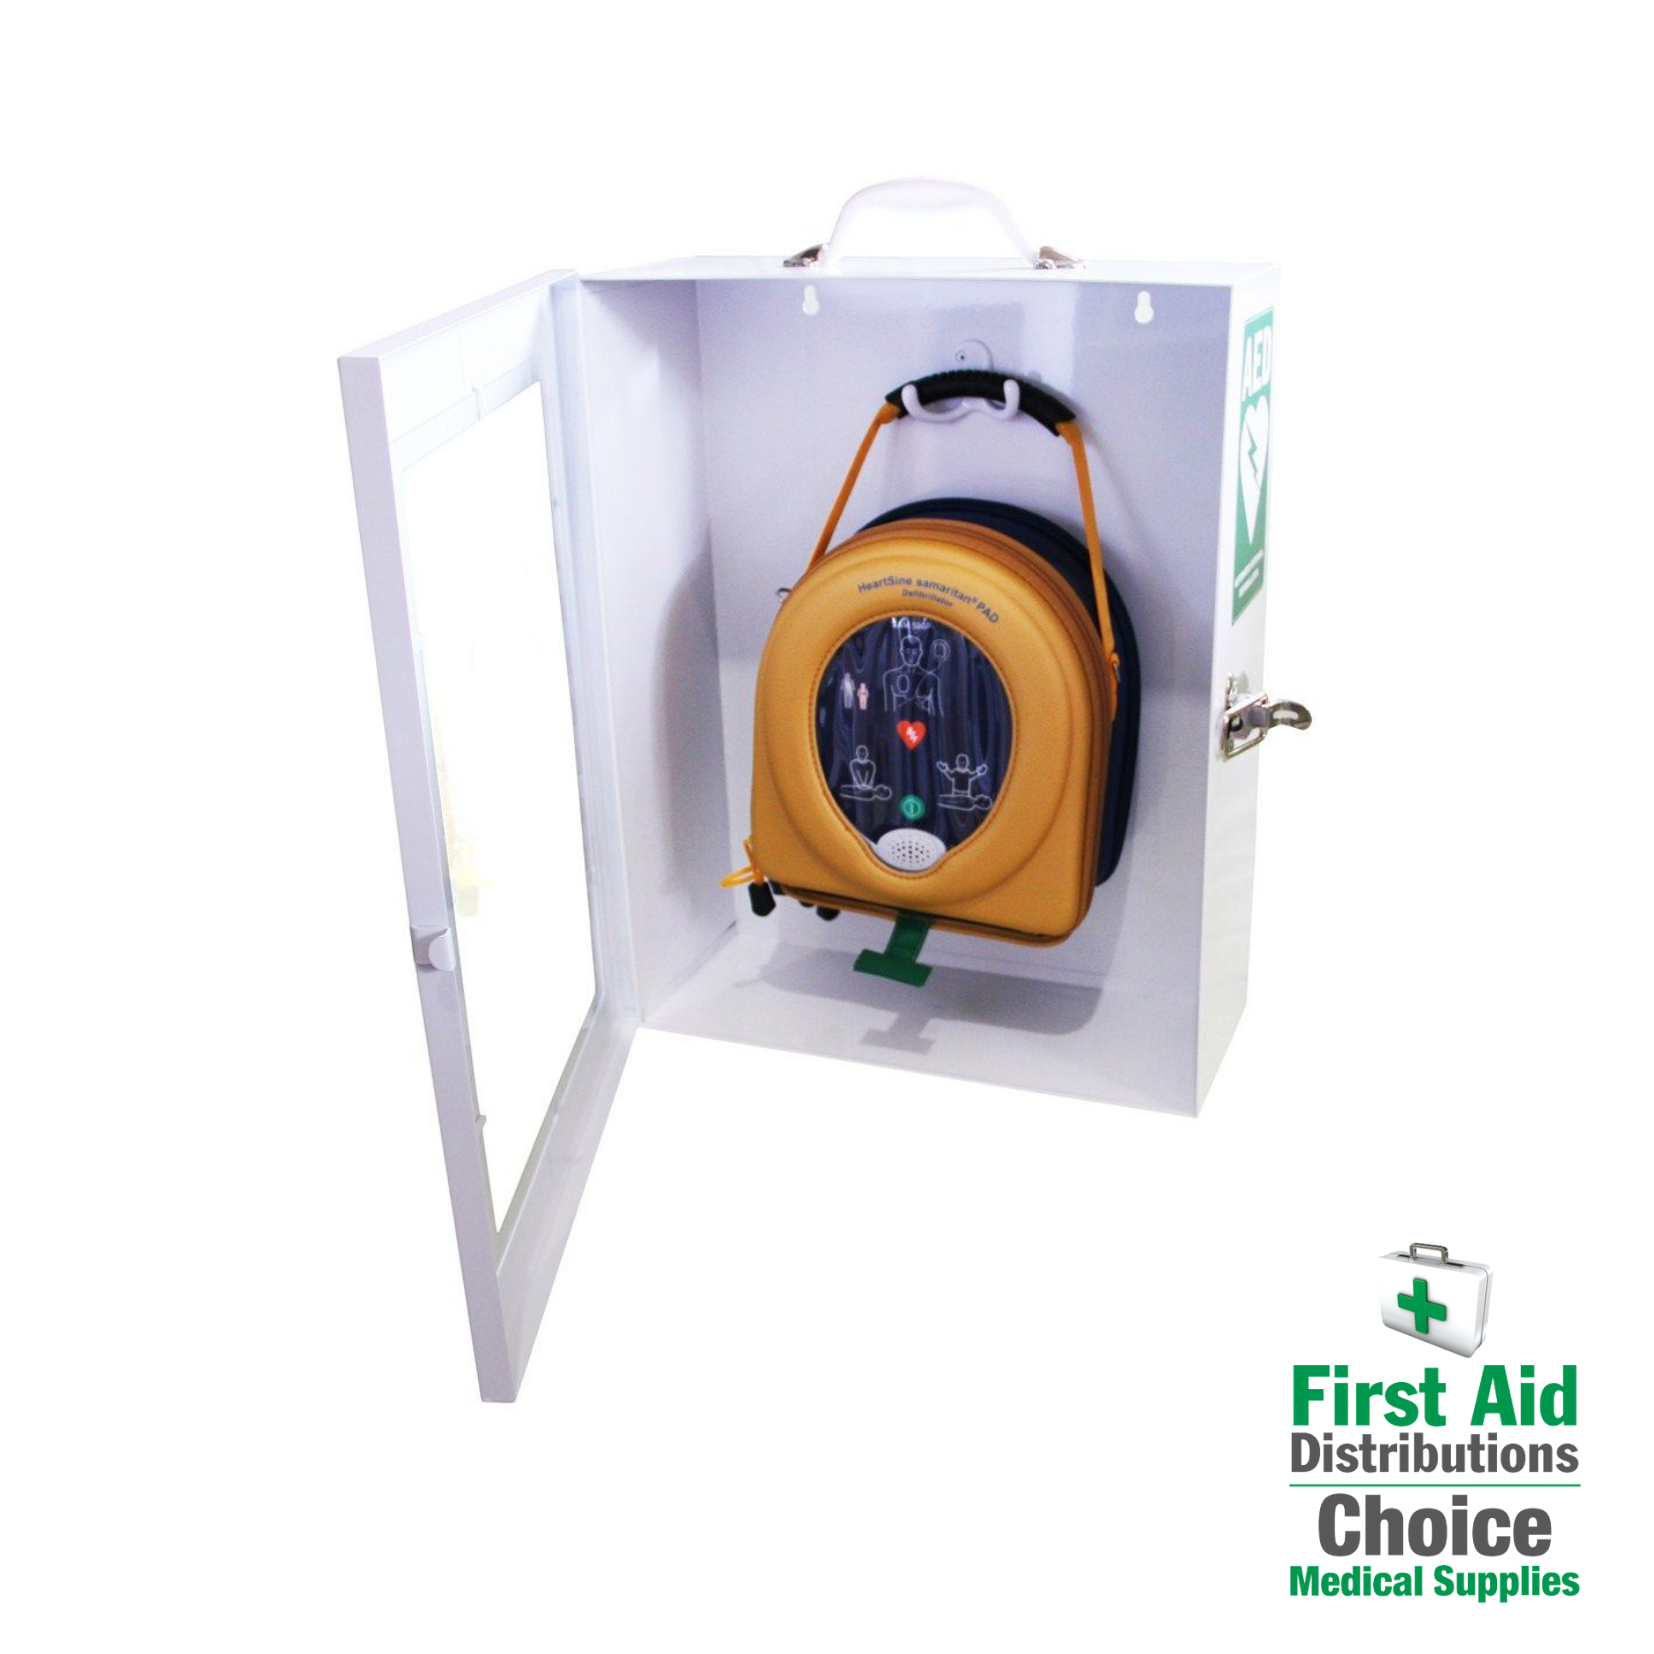 collections/500P_Defibrillator_6_First_Aid_Distributions.png